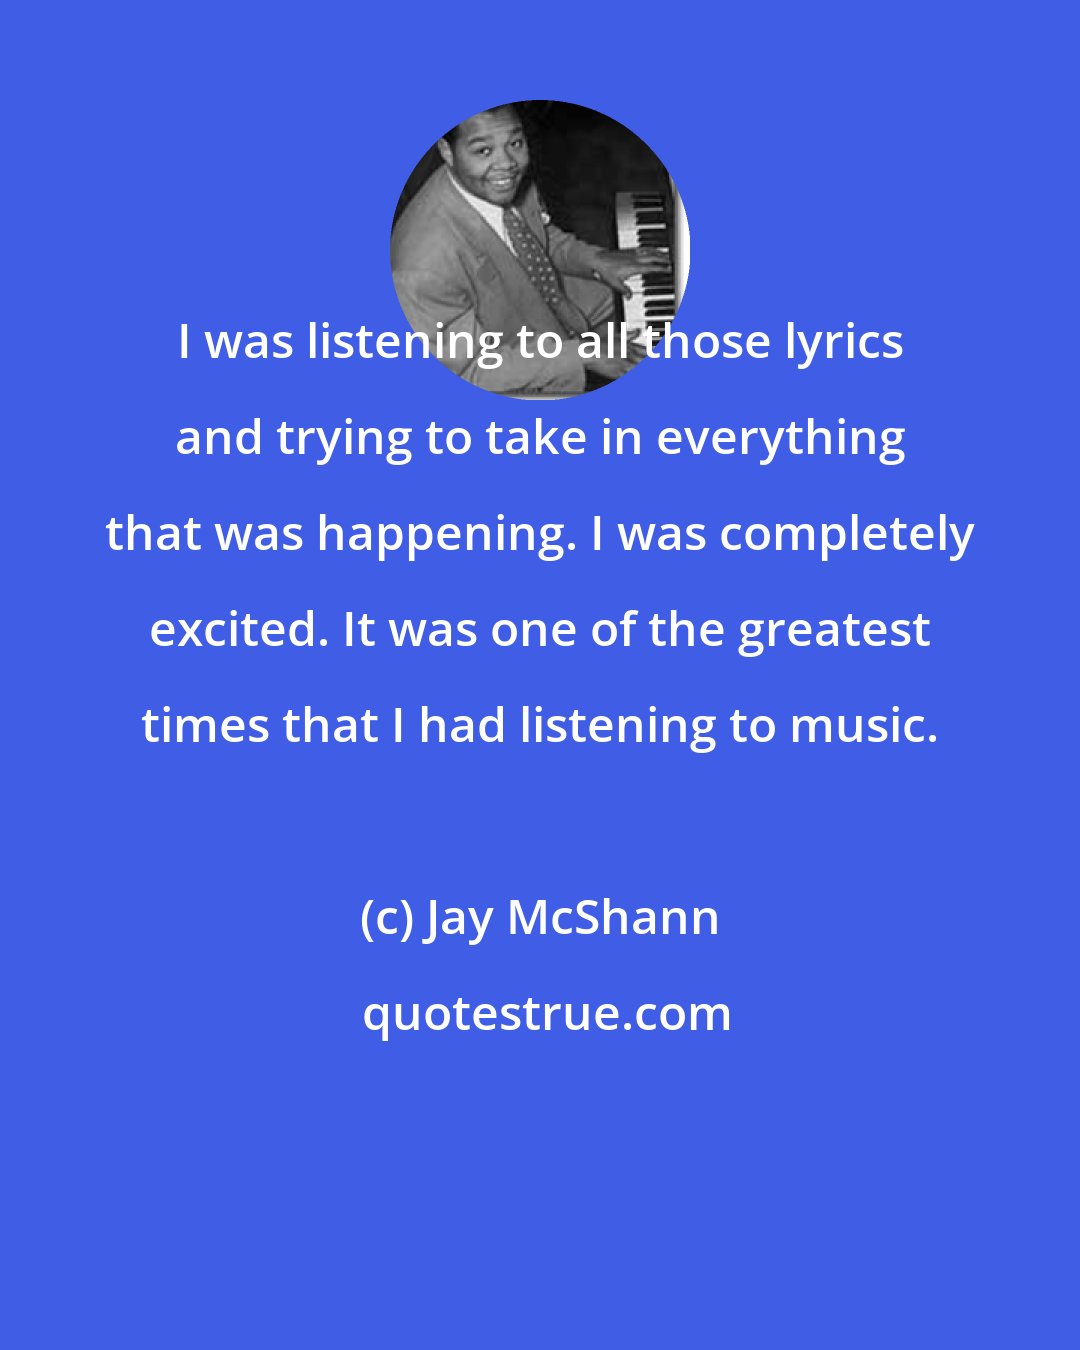 Jay McShann: I was listening to all those lyrics and trying to take in everything that was happening. I was completely excited. It was one of the greatest times that I had listening to music.